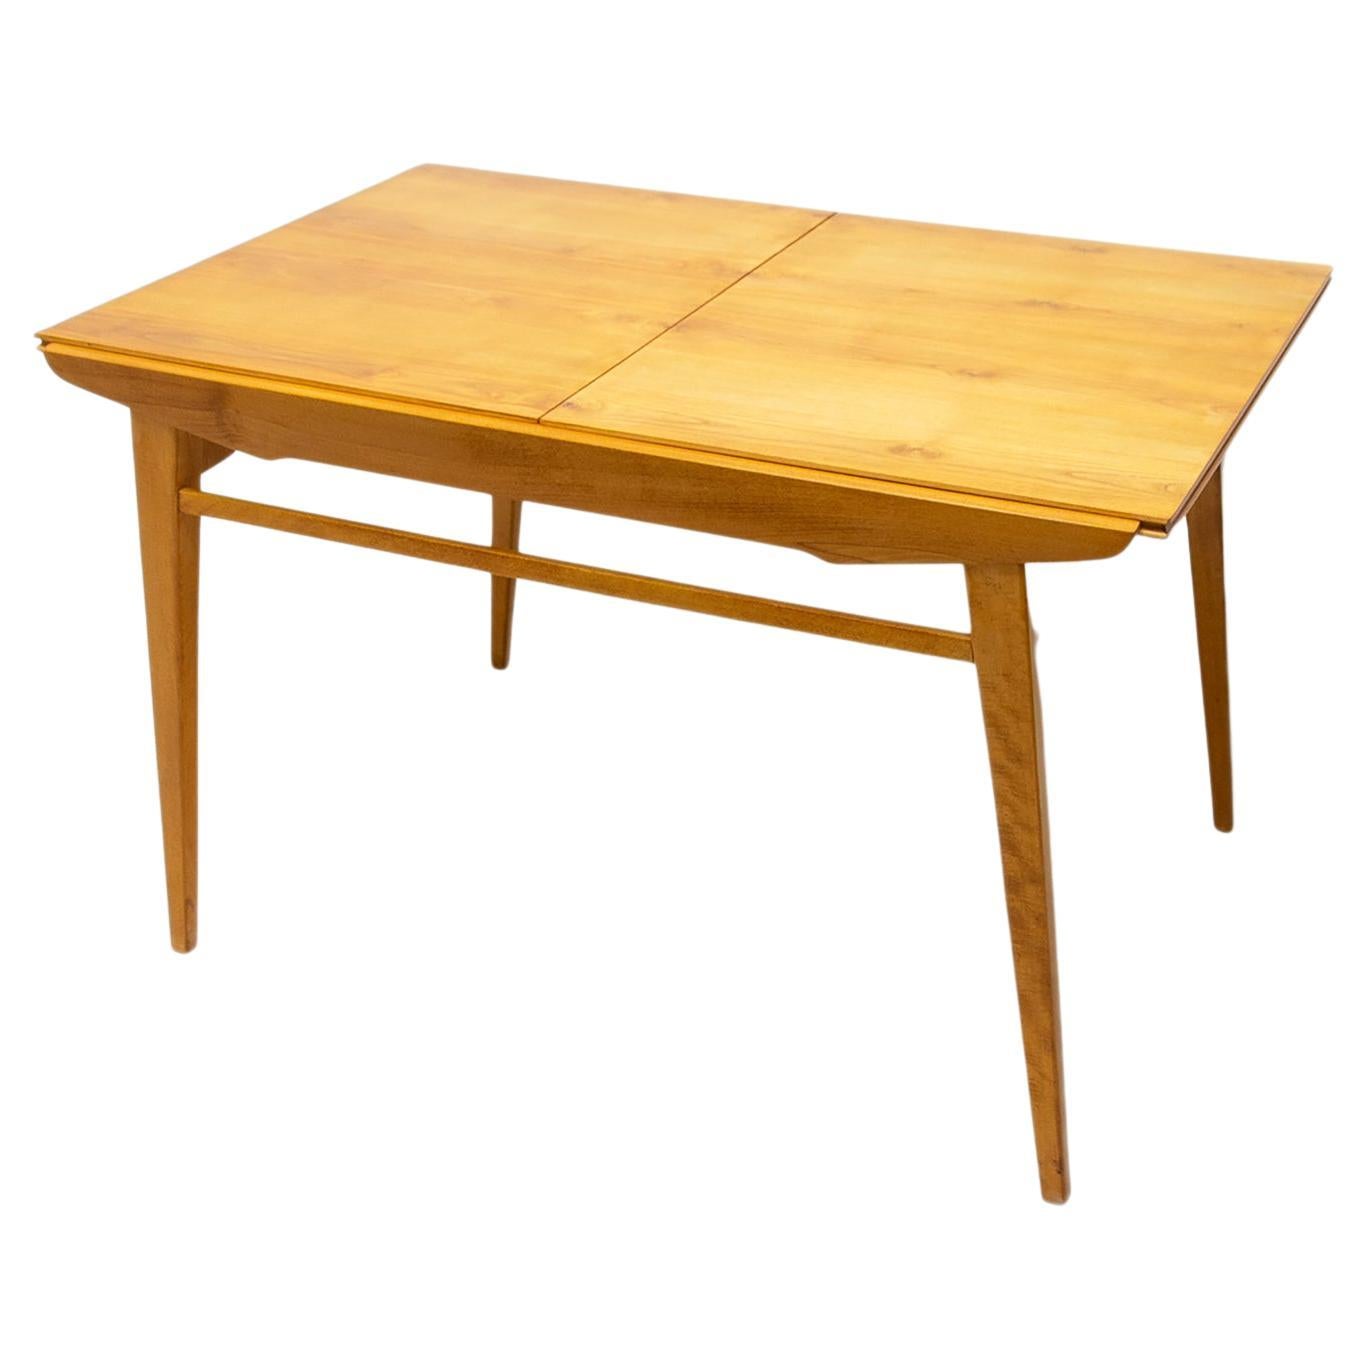 Midcentury Folding Dining Table by Bohumil Landsman for Jitona, 1970s For Sale